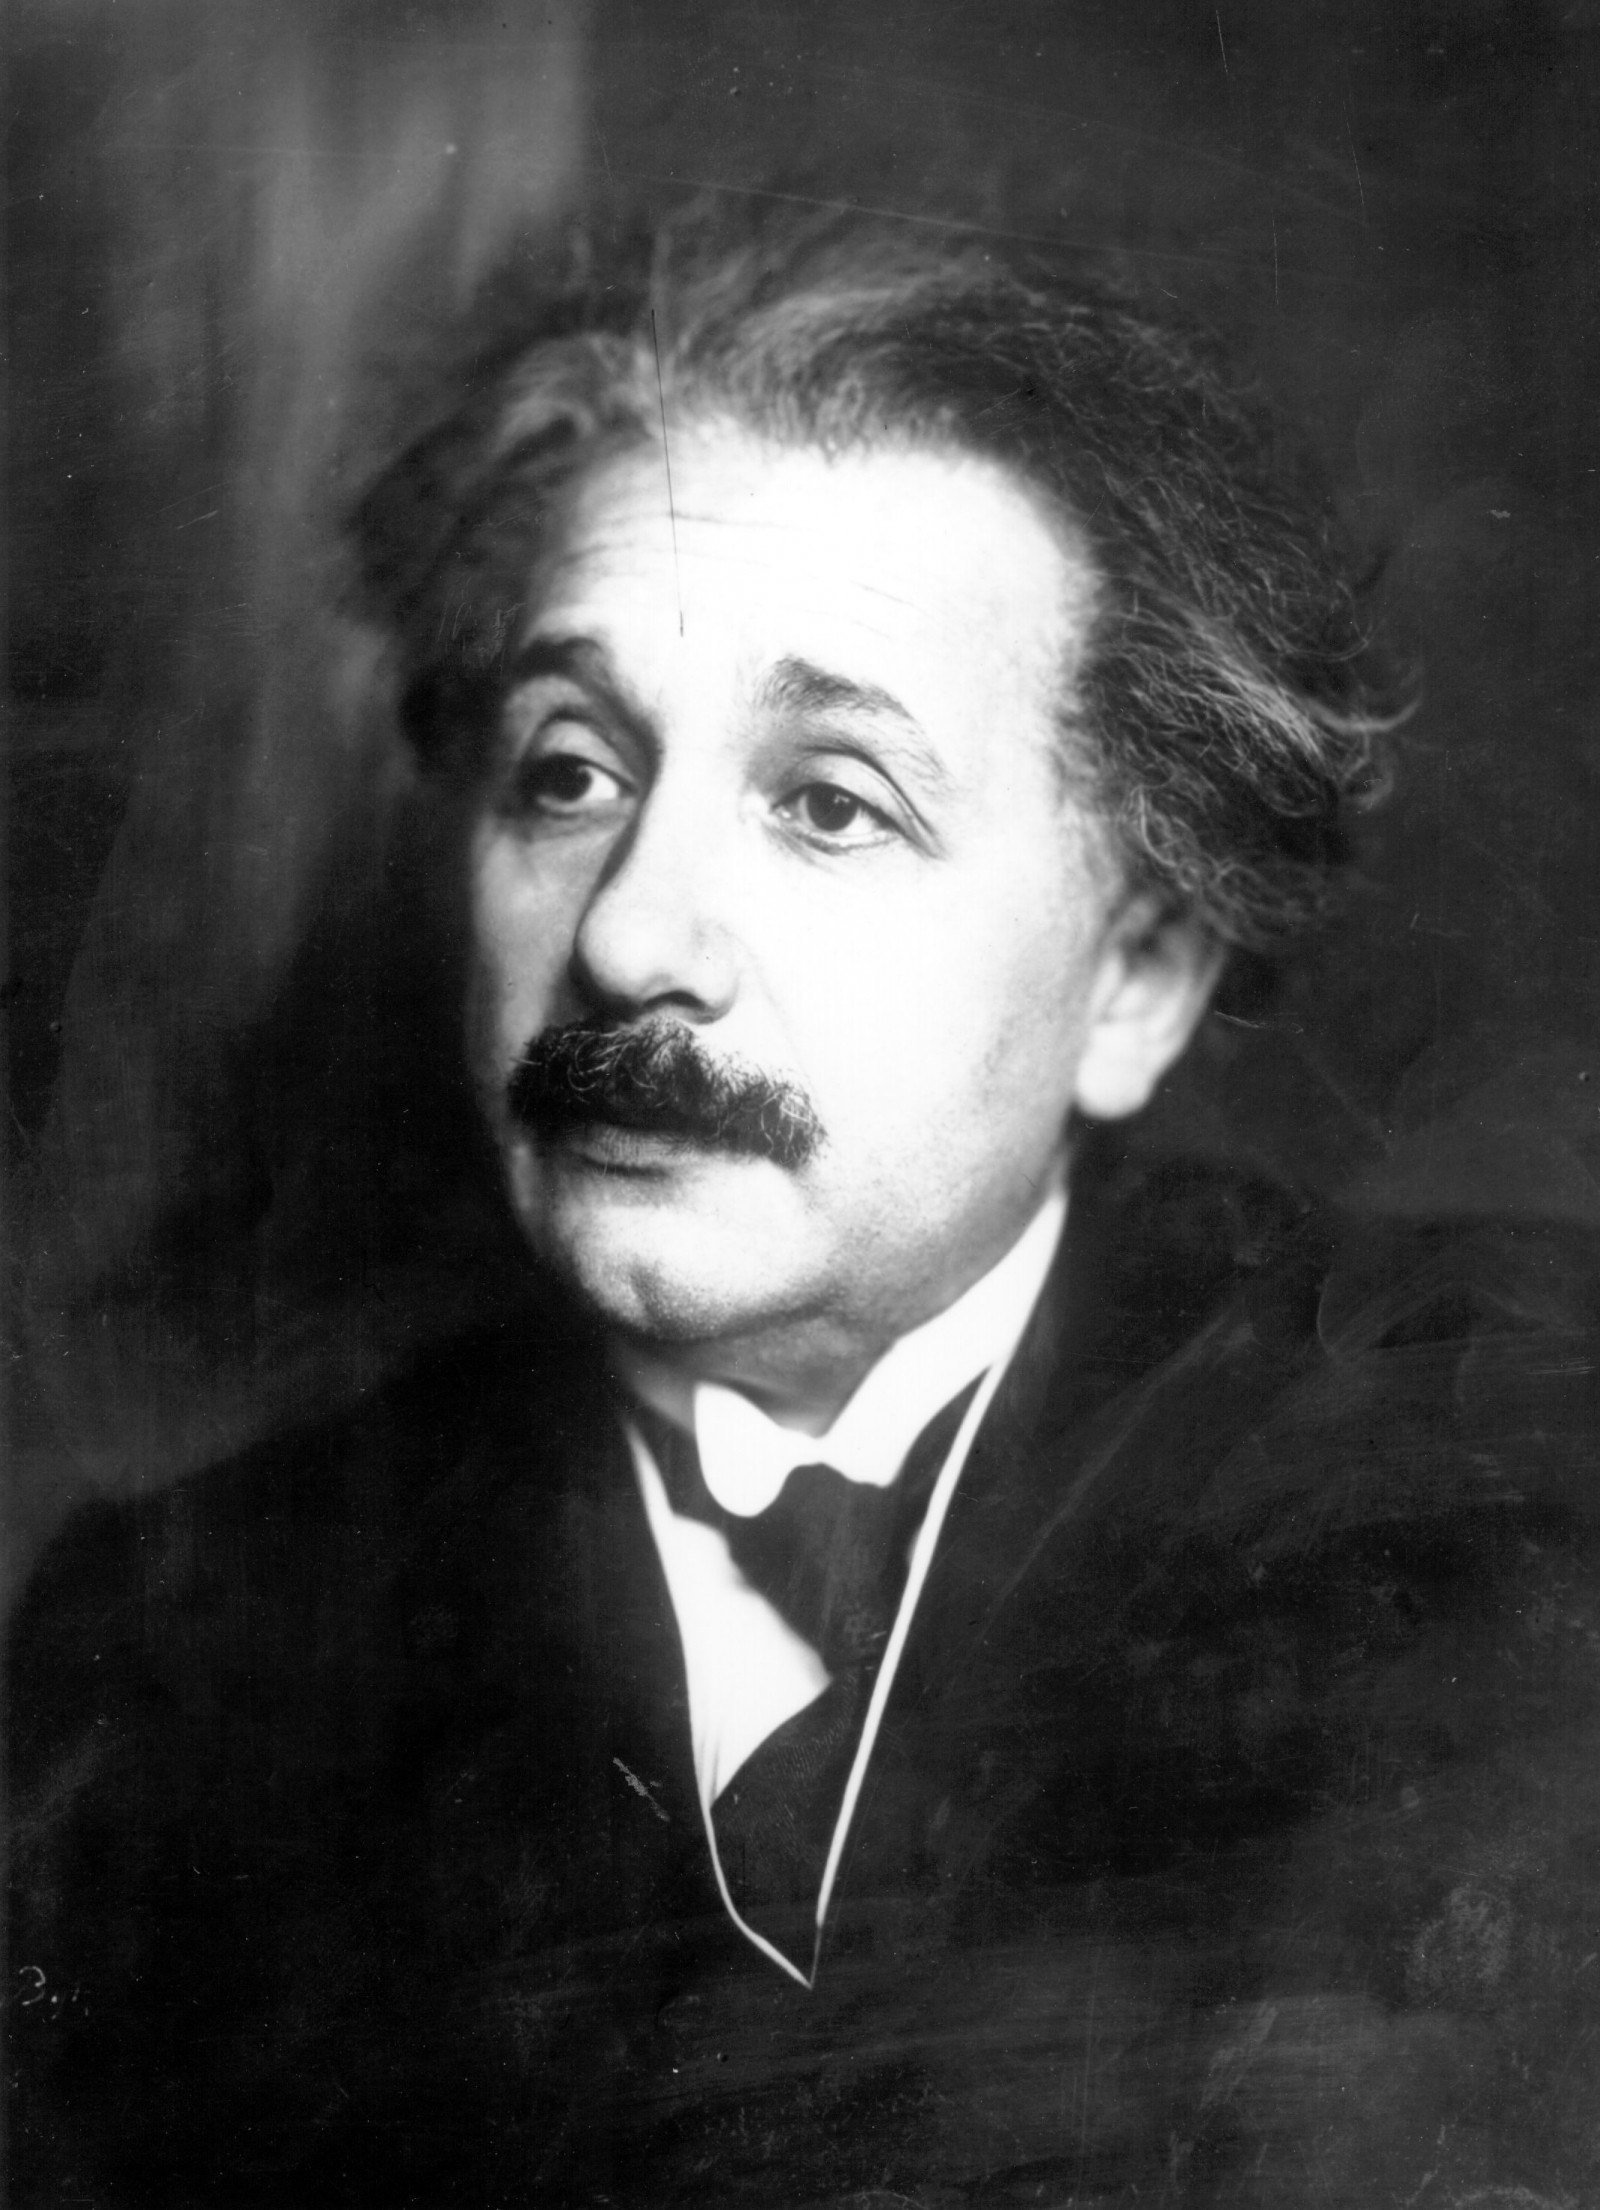 Albert Einstein: Quotes and photos of father of modern physics on 60th  anniversary of death